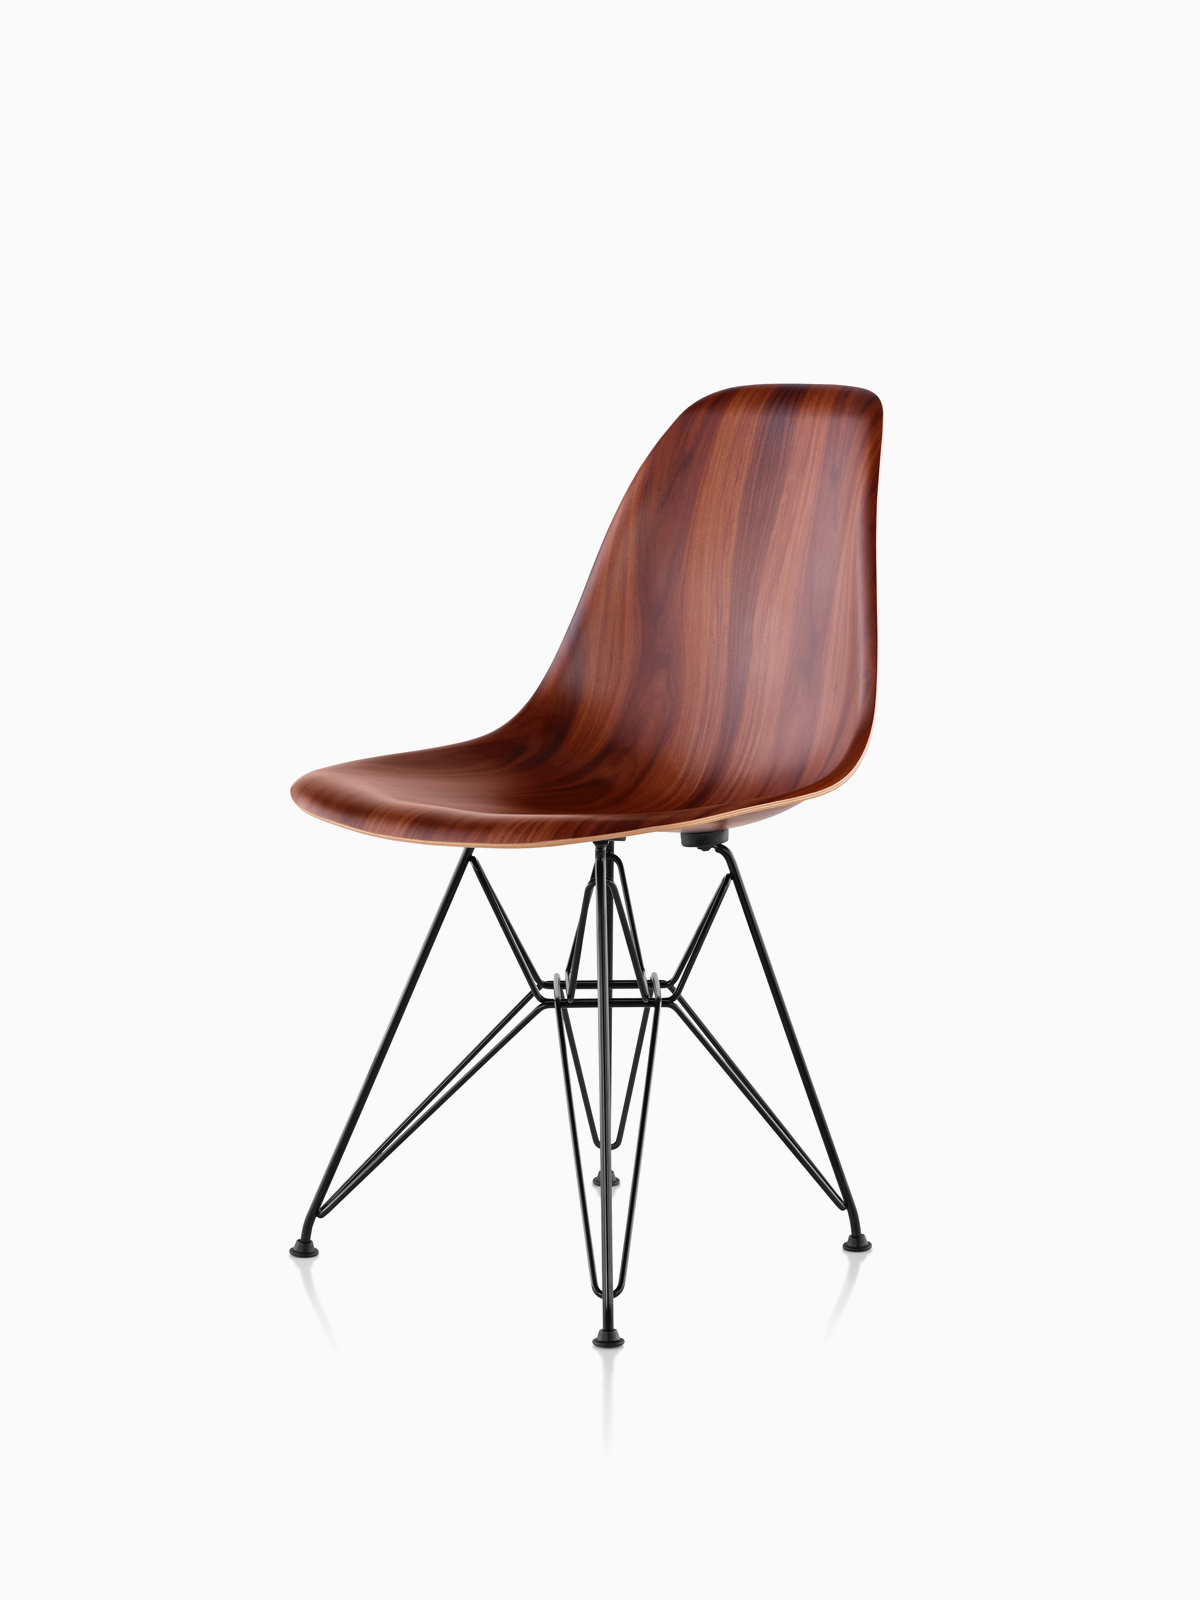 Eames Molded Wood Chairs